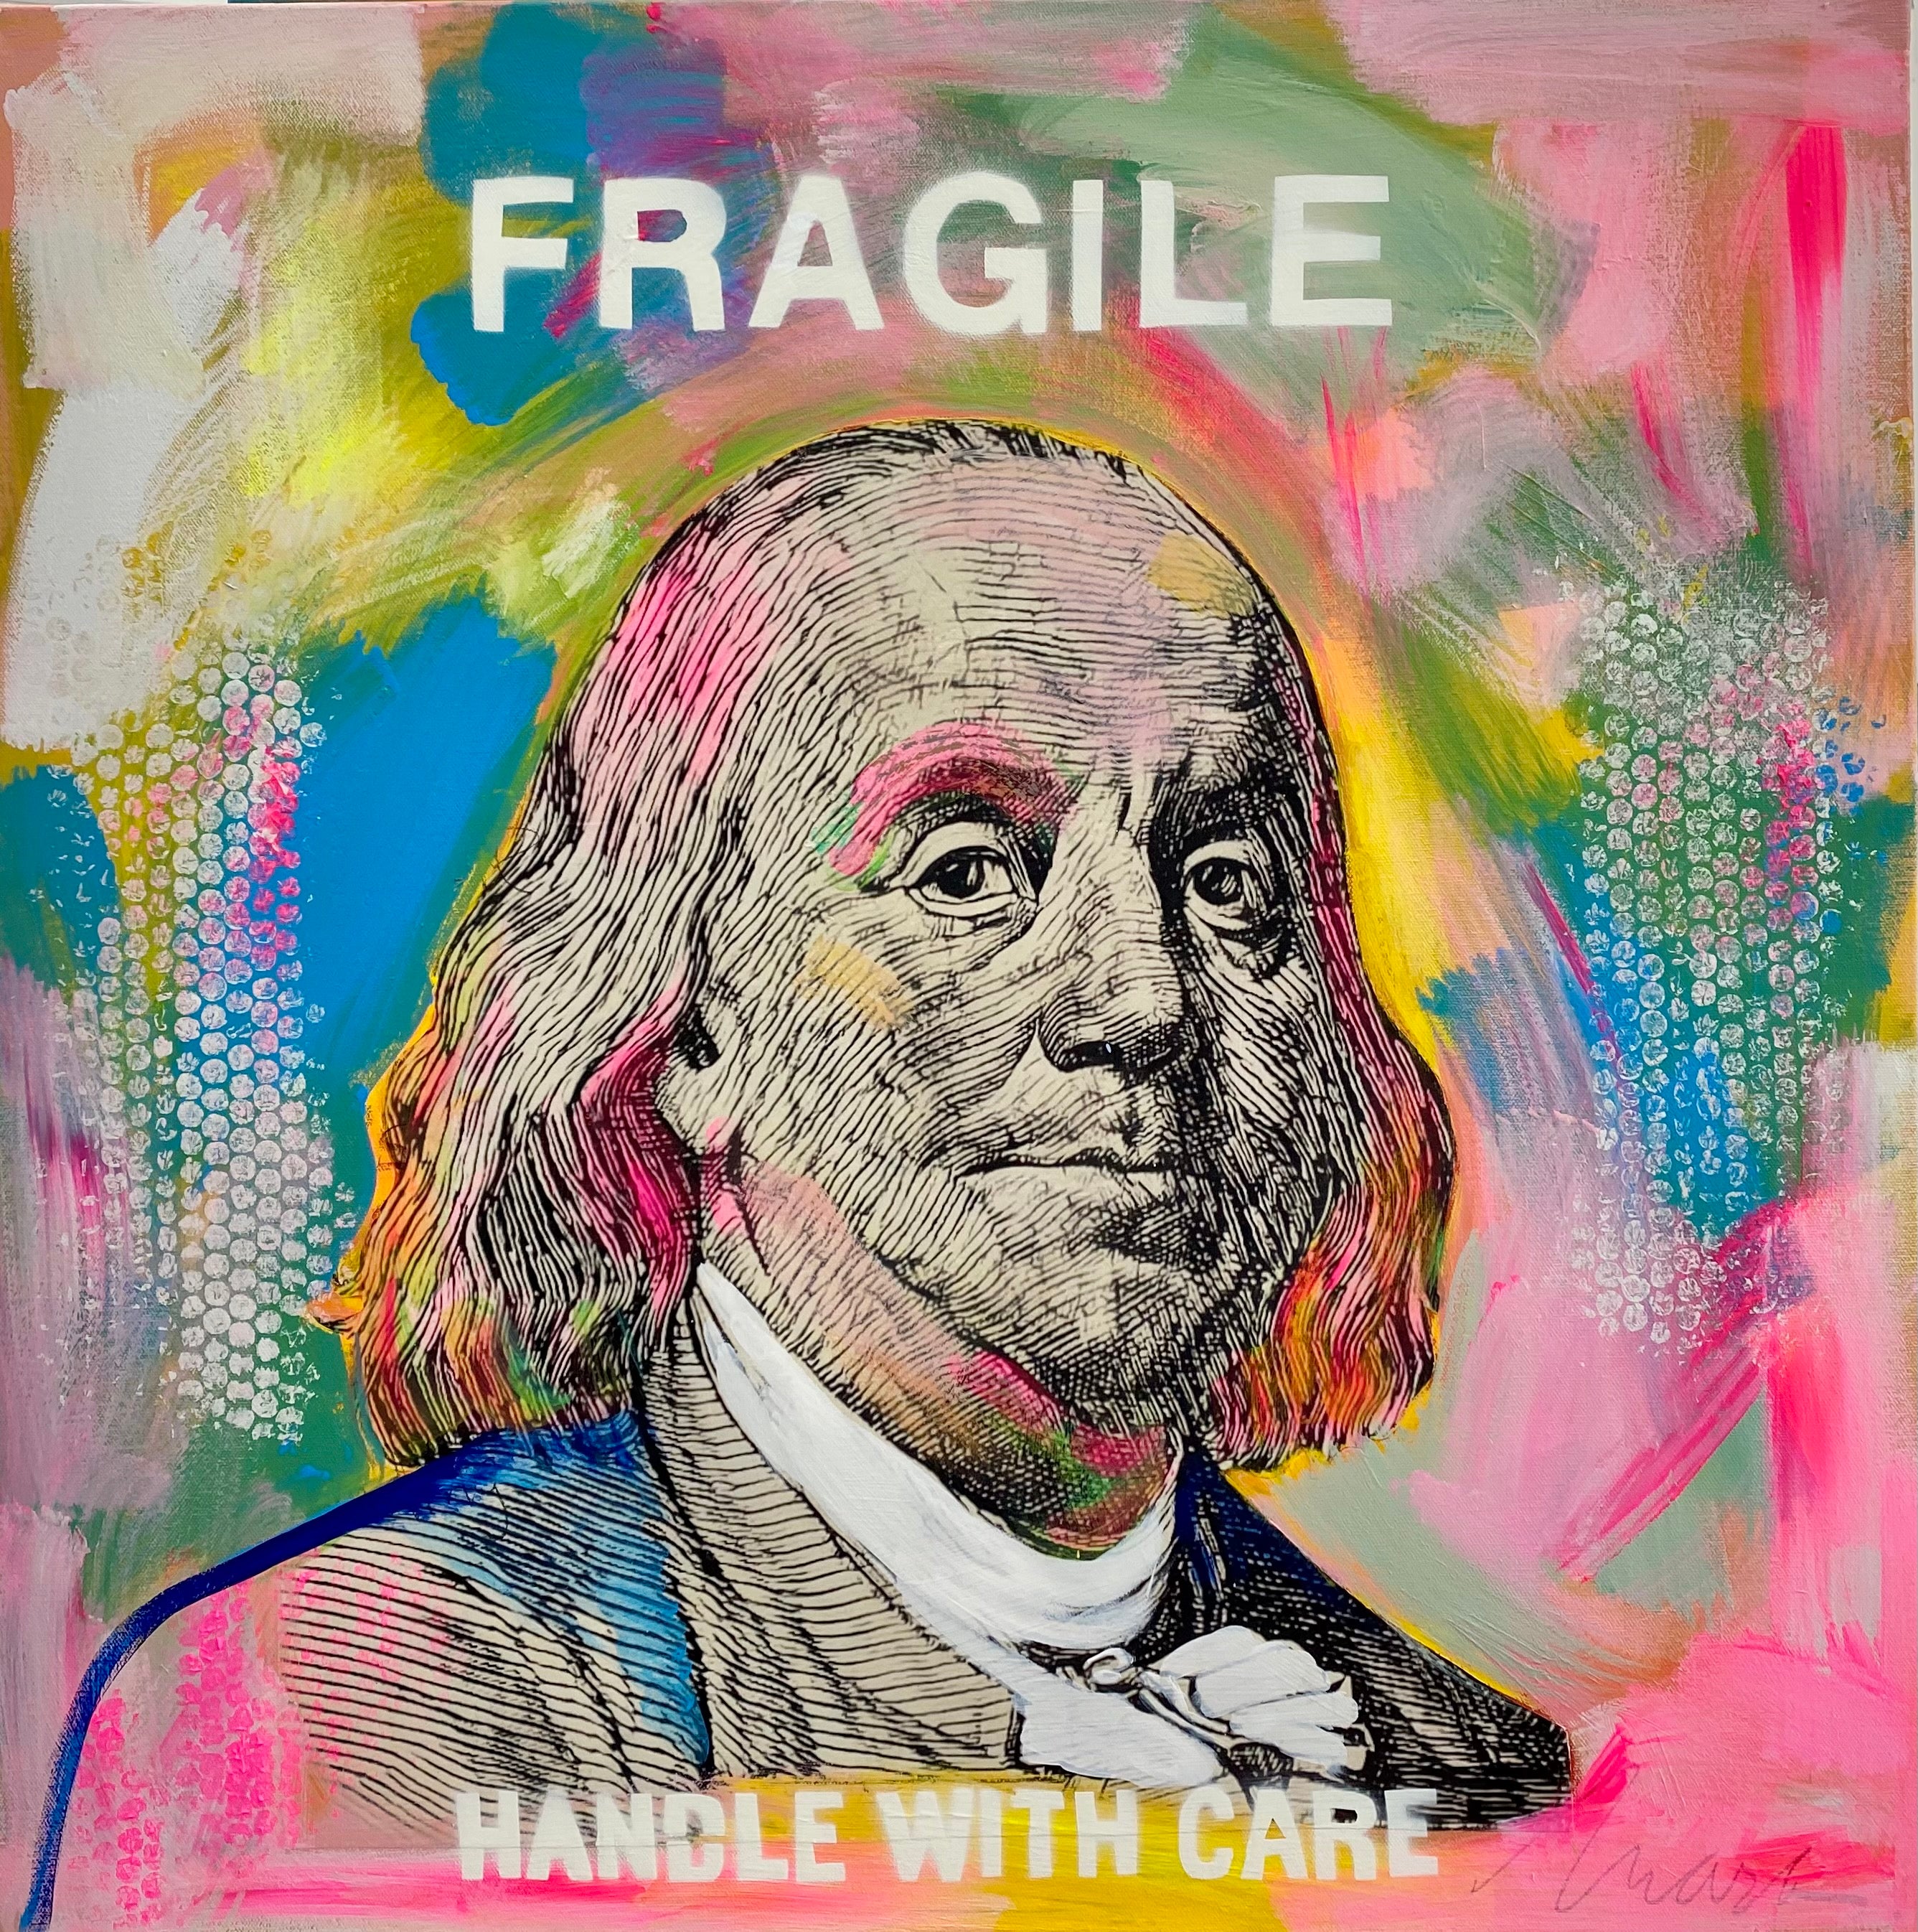 FRAGILE handle with Care